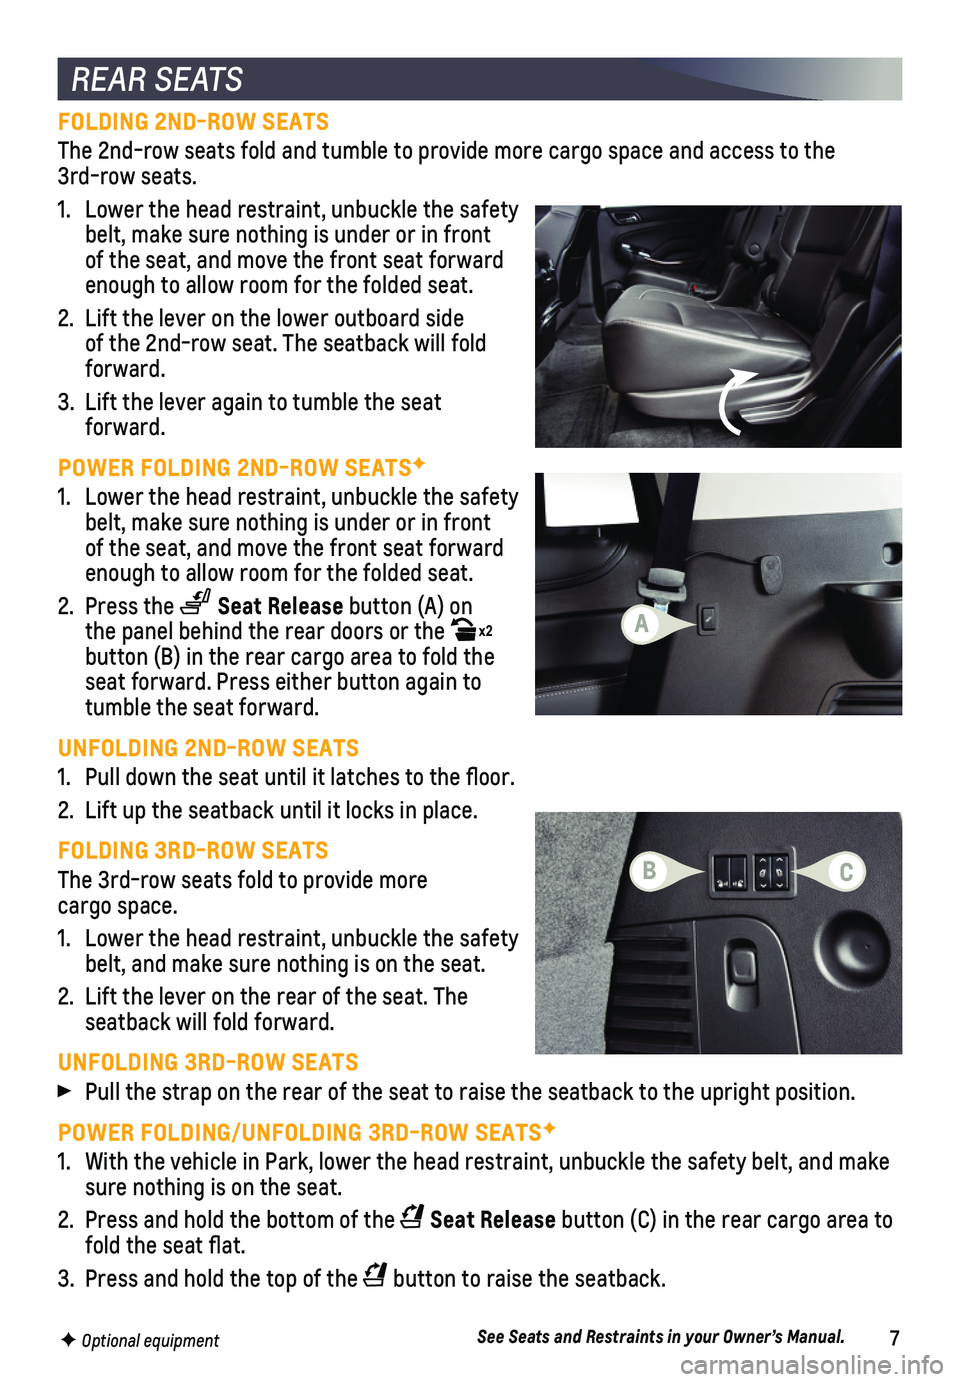 CHEVROLET TAHOE 2018  Get To Know Guide 7
FOLDING 2ND-ROW SEATS
The 2nd-row seats fold and tumble to provide more cargo space and access\
 to the  3rd-row seats.
1. Lower the head restraint, unbuckle the safety belt, make sure nothing is un